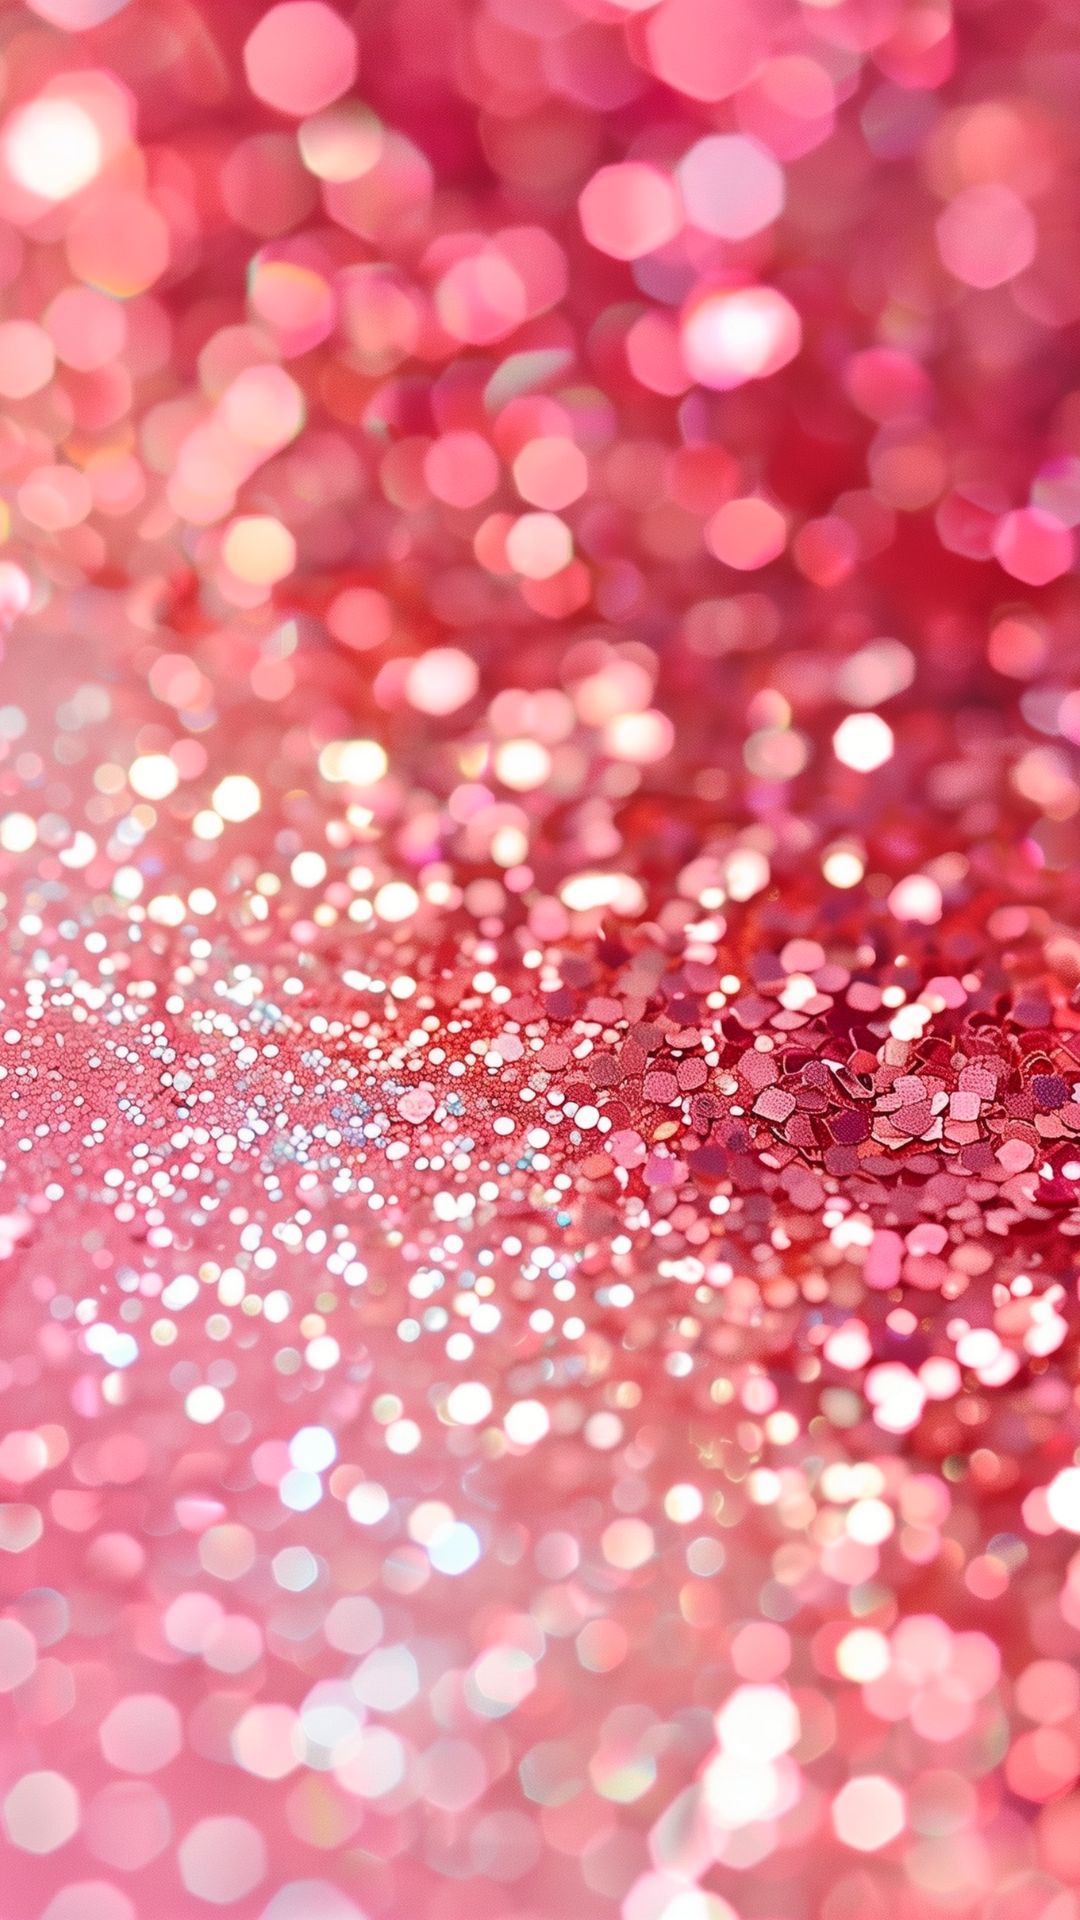 Make Your Phone Sparkle With 21 Glitter iPhone Wallpapers and Midjourney Prompts - Sprinkle of AI